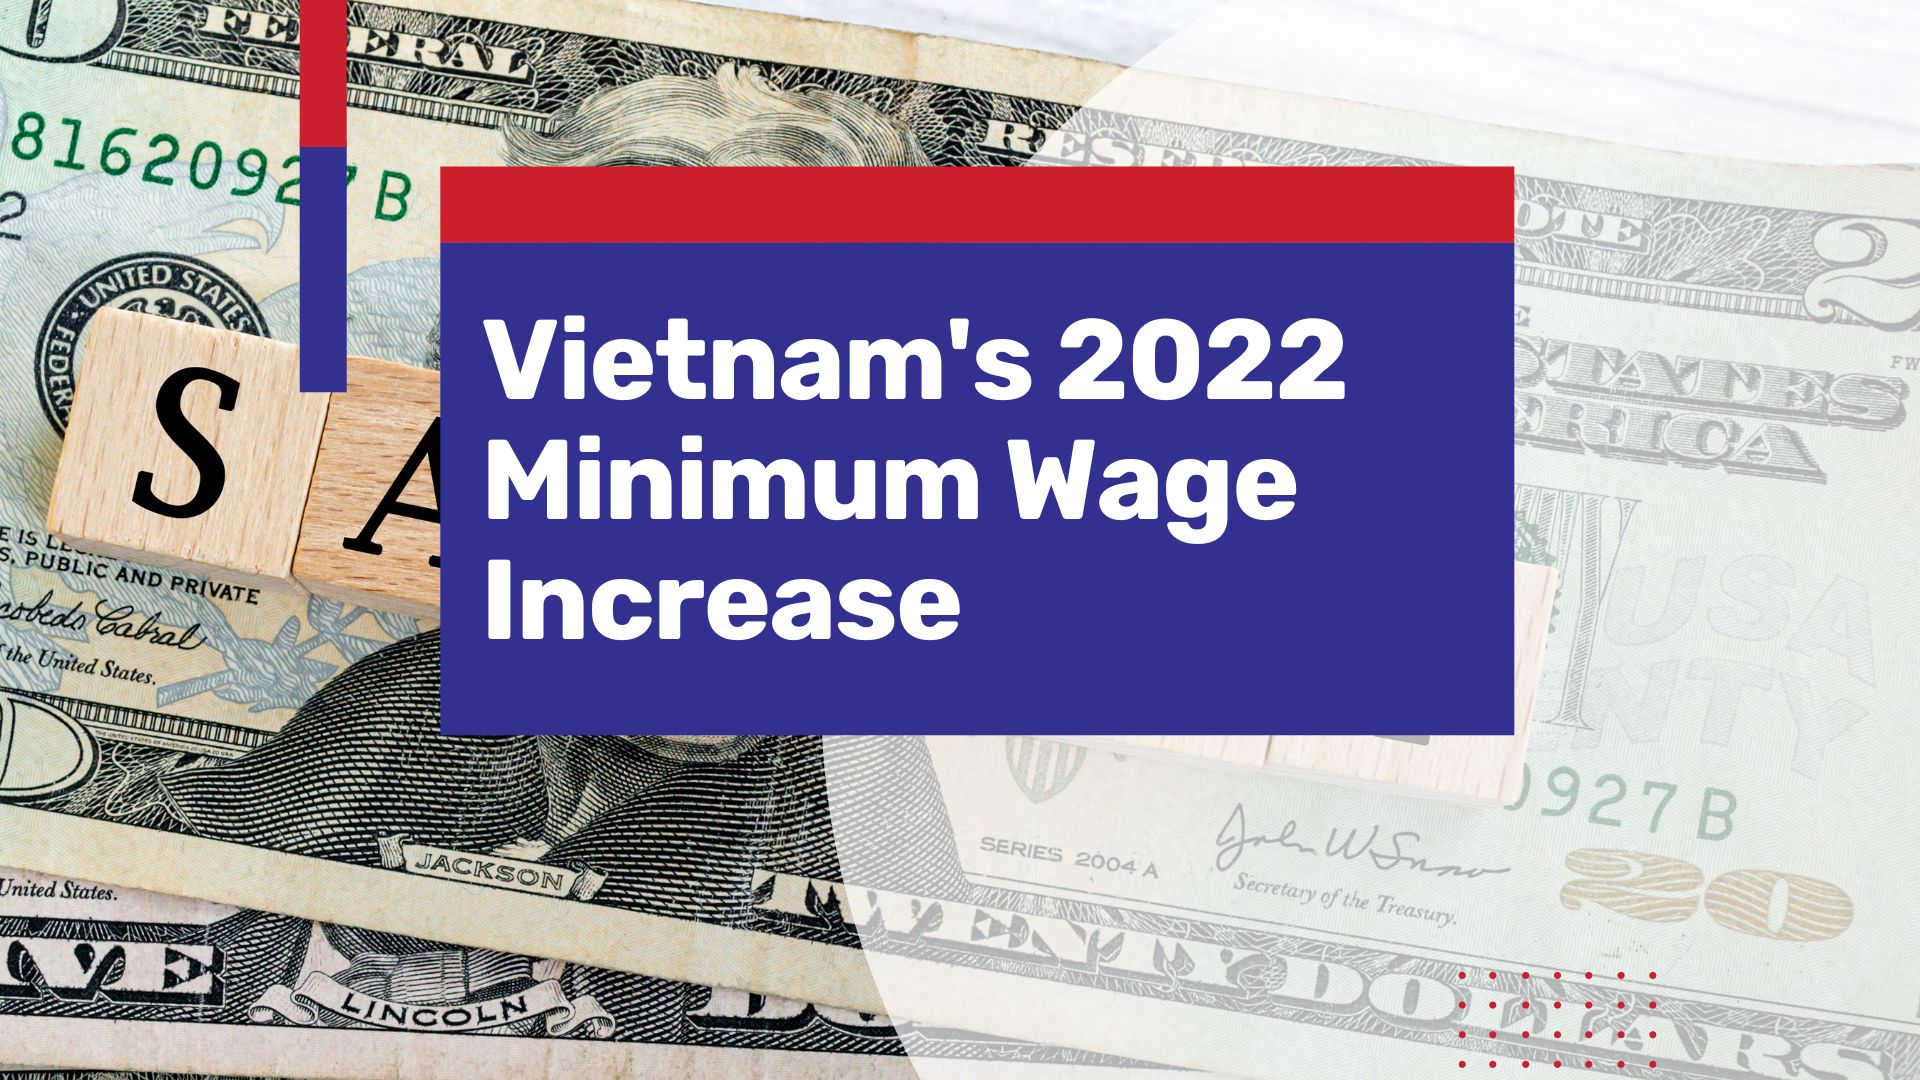 Vietnam’s Minimum Wage to see 6% Increase from July 2022